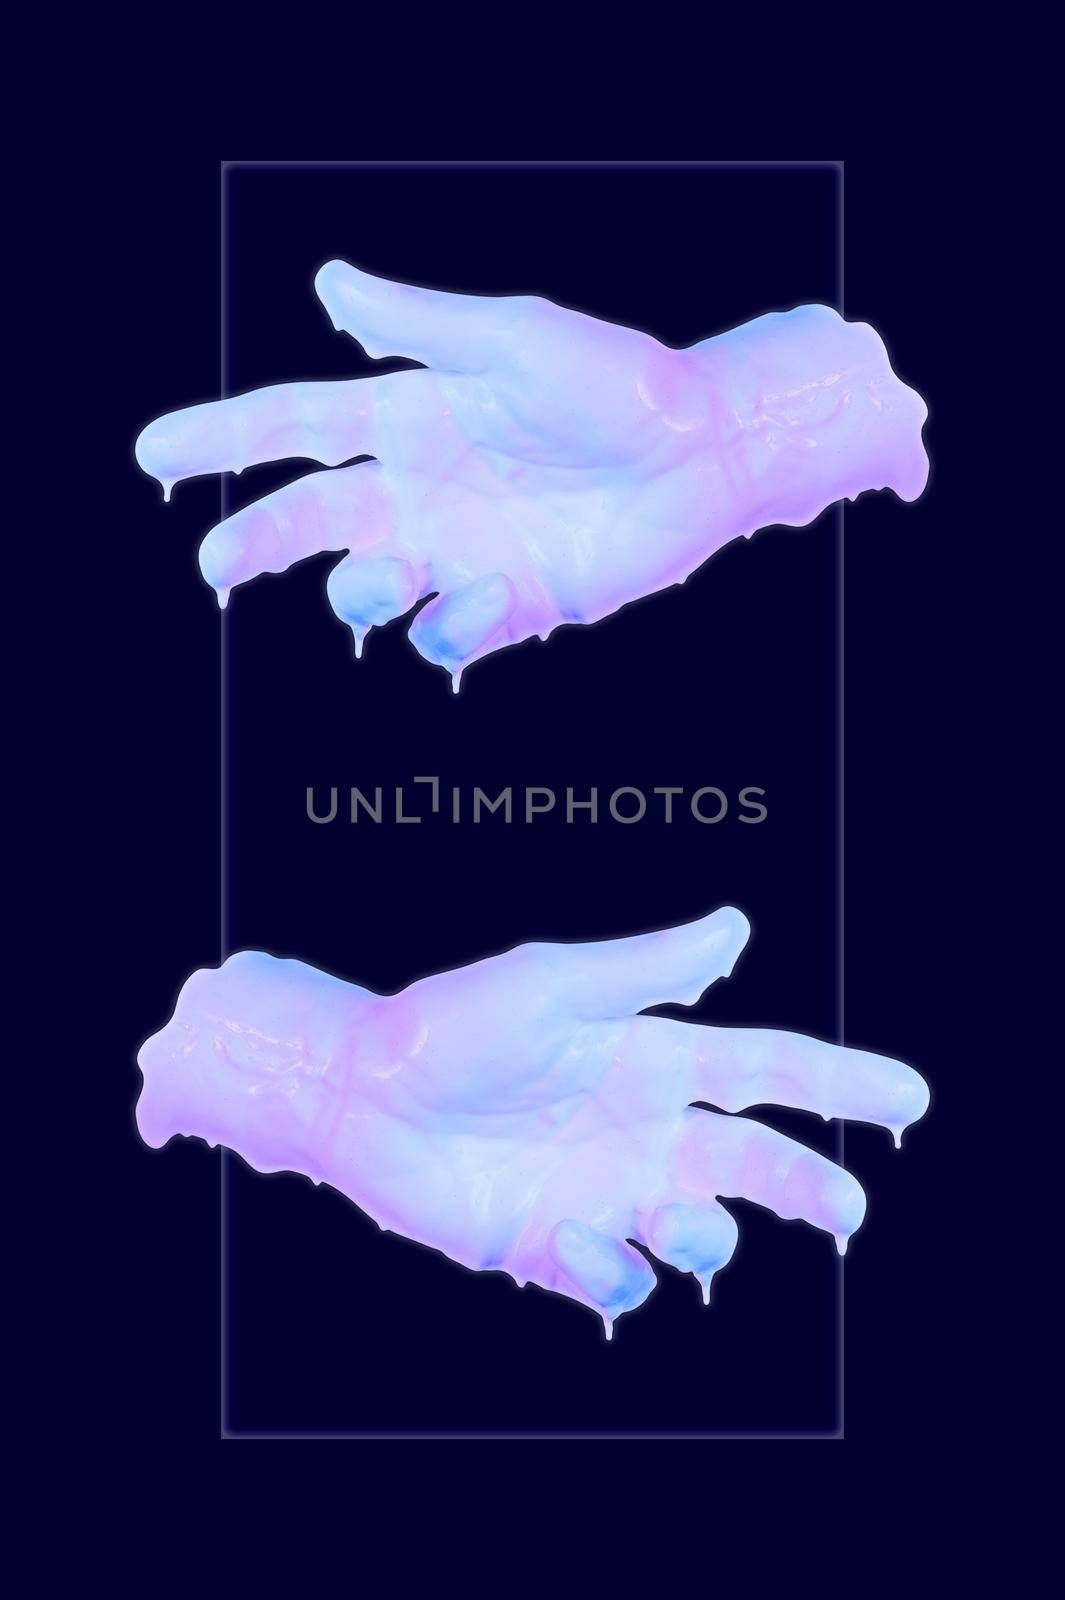 Human fingers dipped in color paint. Painted hands. Liquid drips off palms. Gesture. Contemporary art collage. Abstract surreal pop art style. Modern concept image. Funky minimalism. Zine culture.